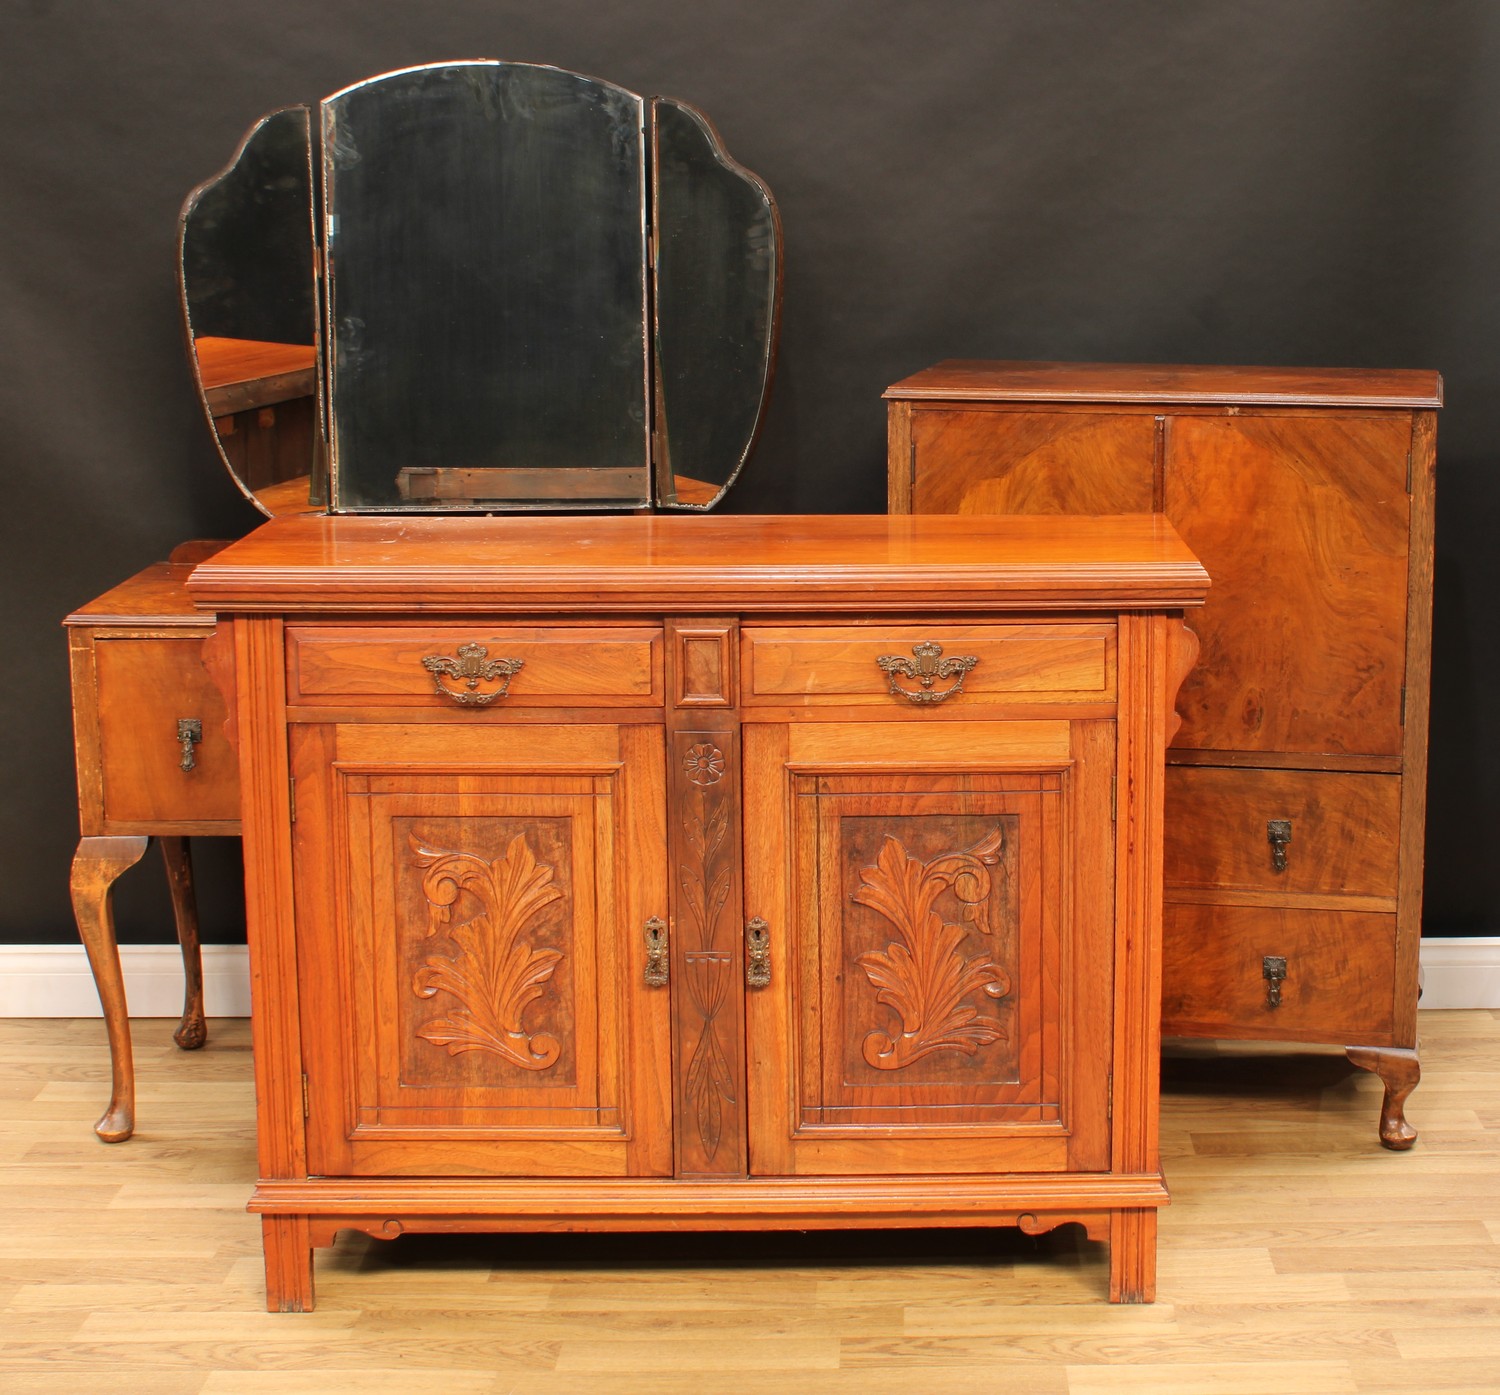 A two piece walnut bedroom suite, comprising dressing table, 154.5cm high, 108cm wide, 50cm deep and